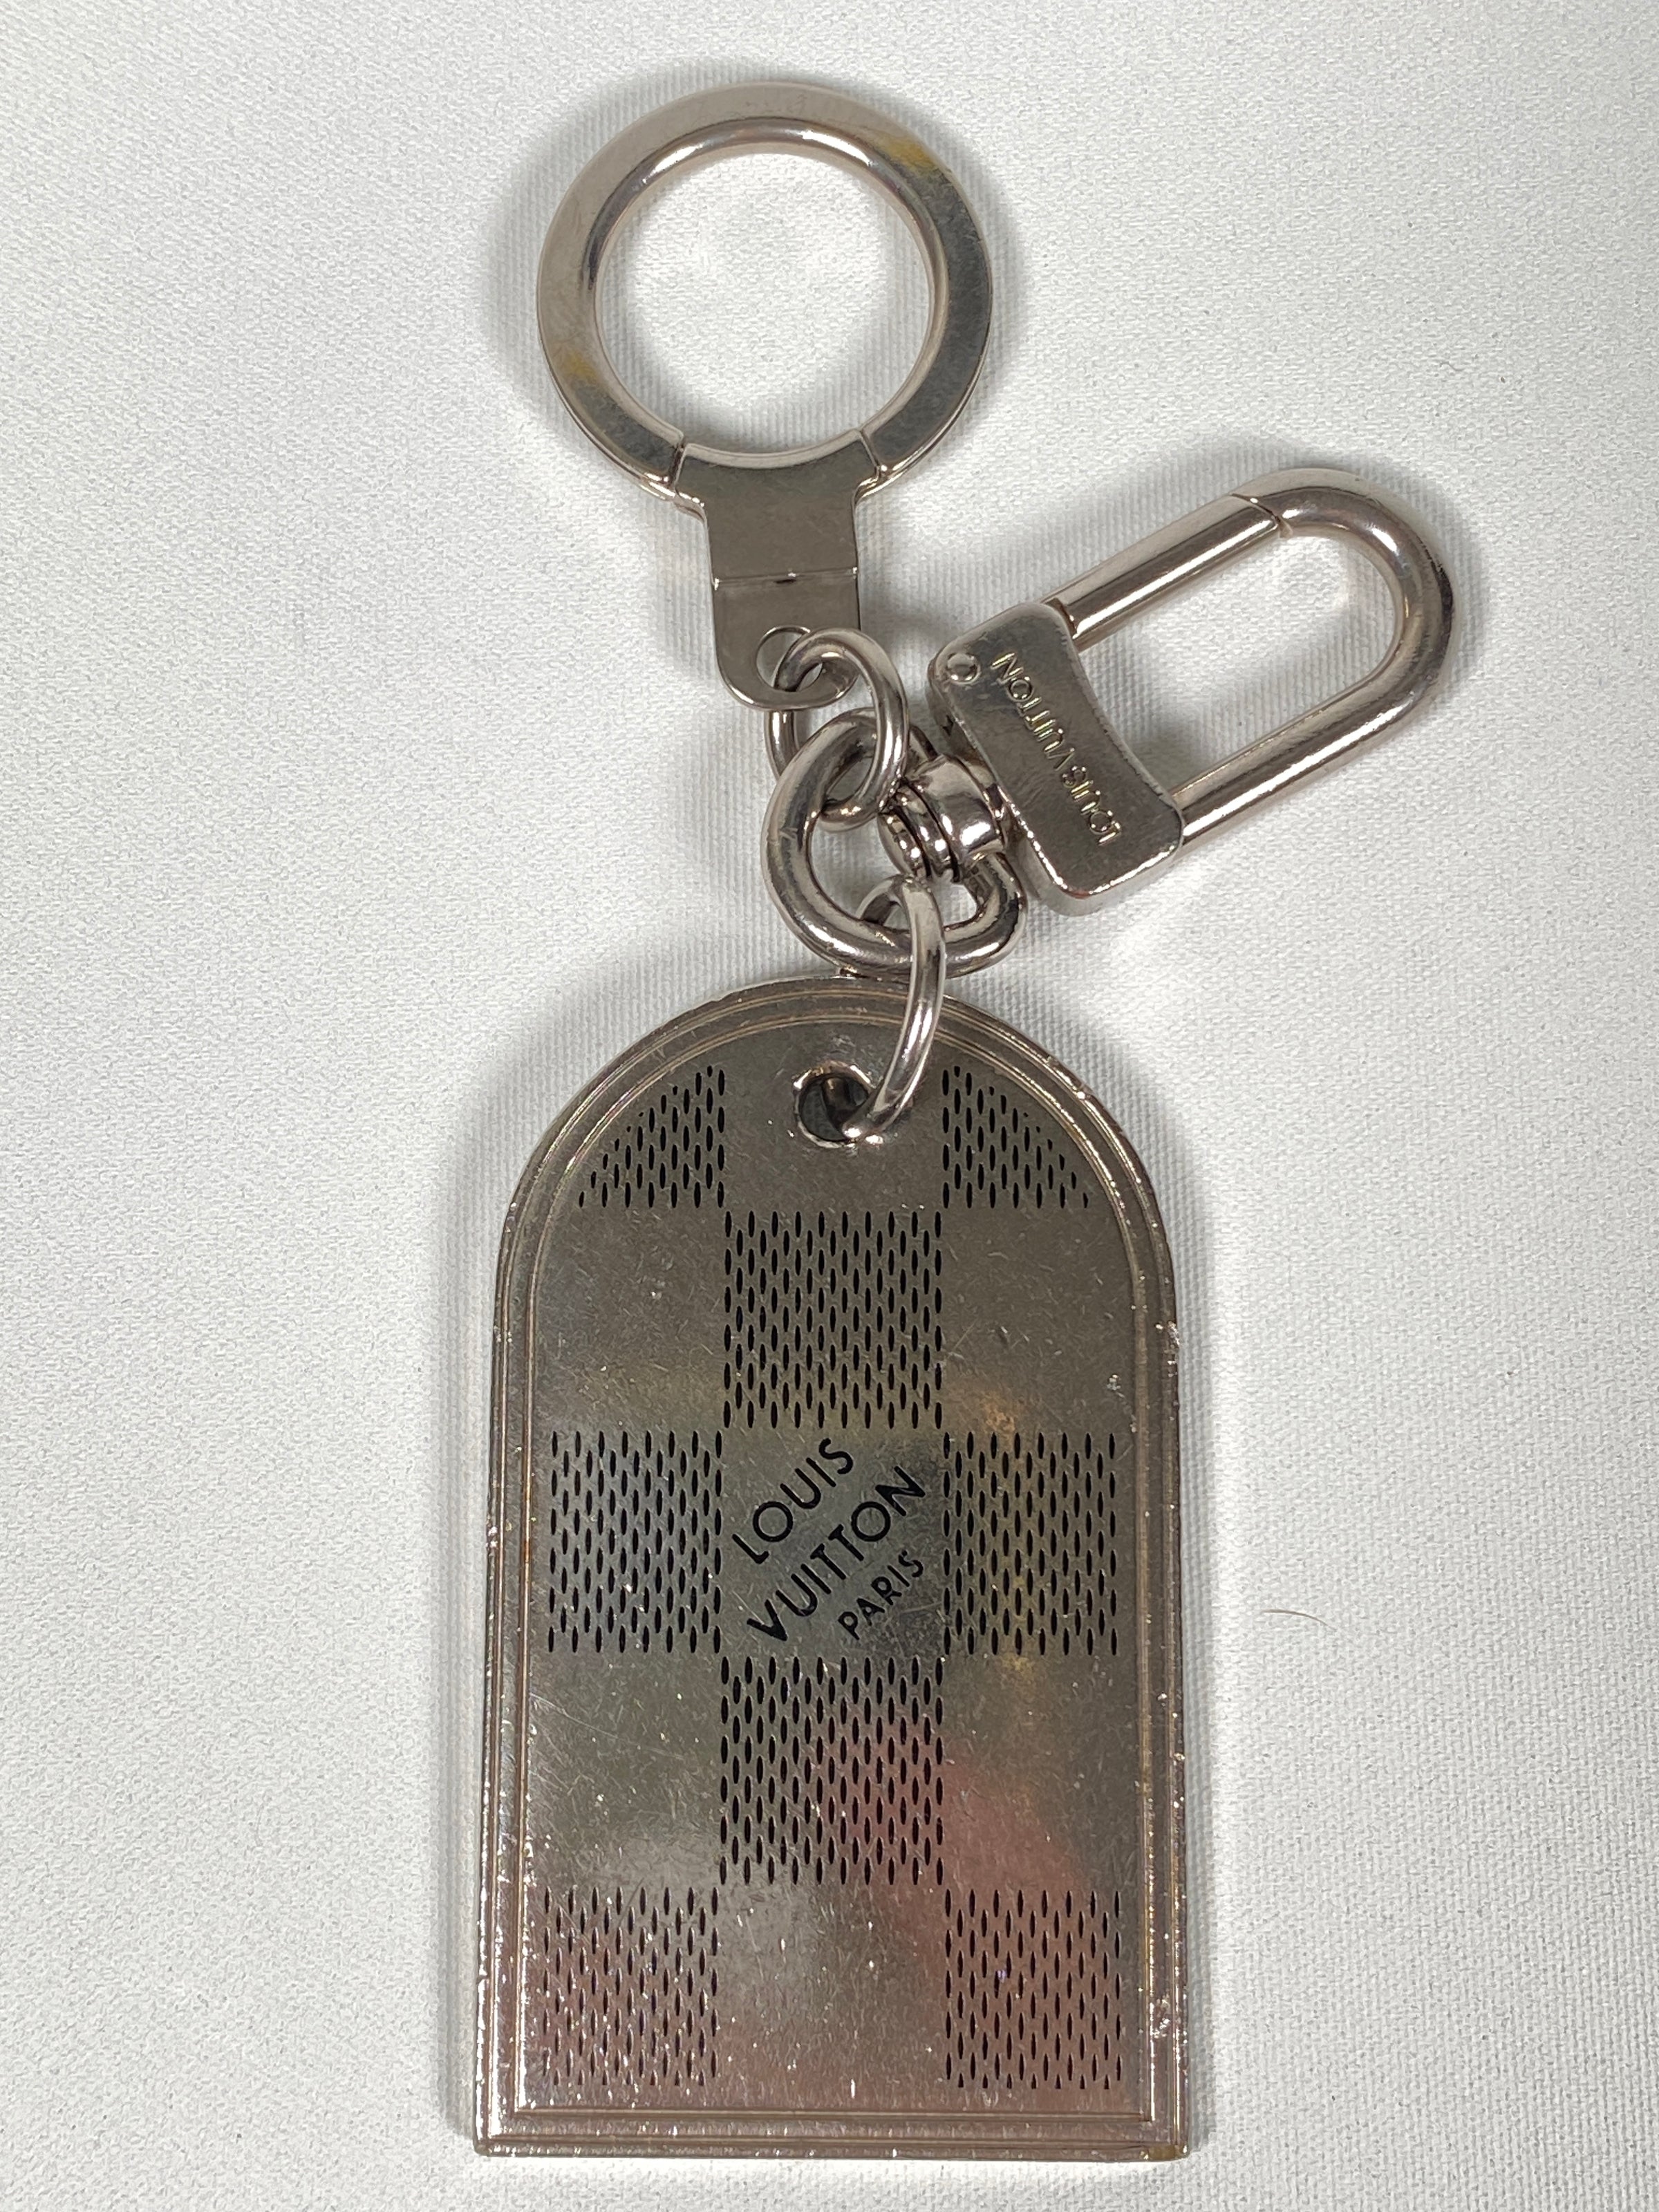 Louis Vuitton Metal Luggage Tag Key Holder and Bag Charm w/ Tags - Silver  Bag Accessories, Accessories - LOU824190